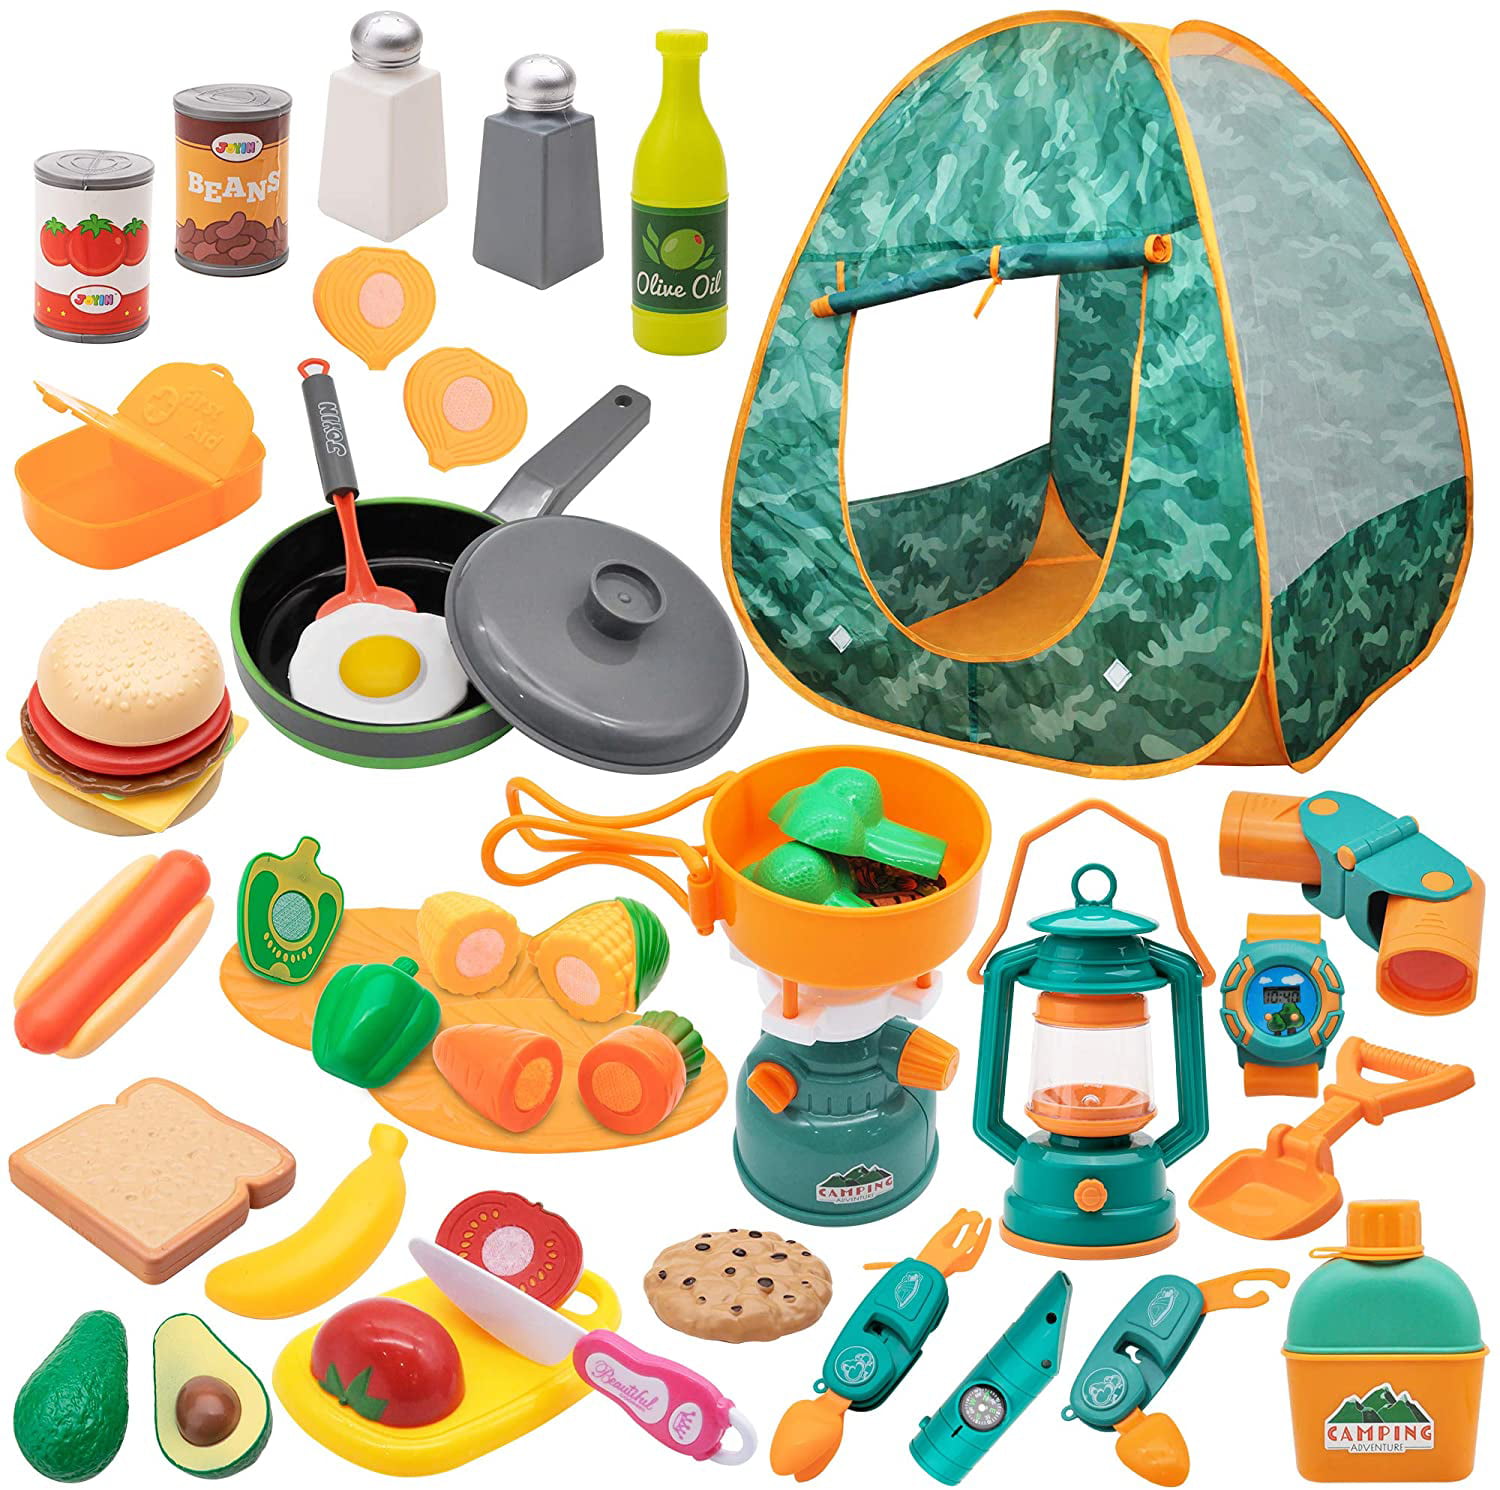 pcs Camping Gear Tool Pretend Play Set for Kids Toddlers Indoor and Outdoor Toy Birthday Gift JOYIN Kids Camping Set with Tent 30 